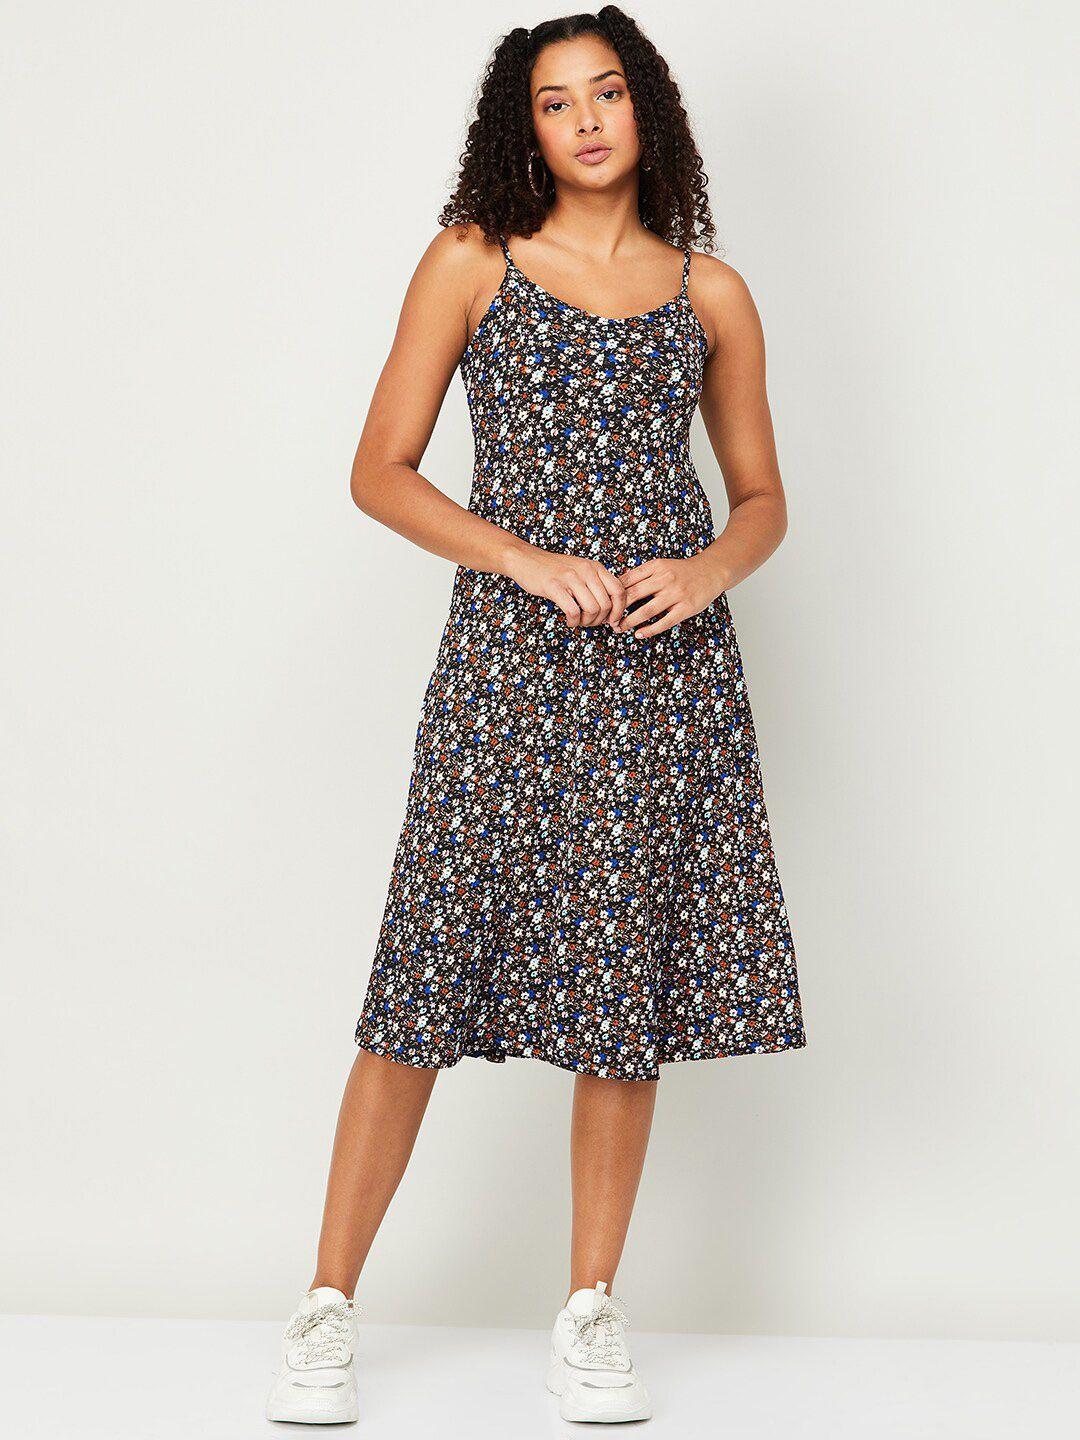 ginger-by-lifestyle-floral-print-fit-&-flare-dress